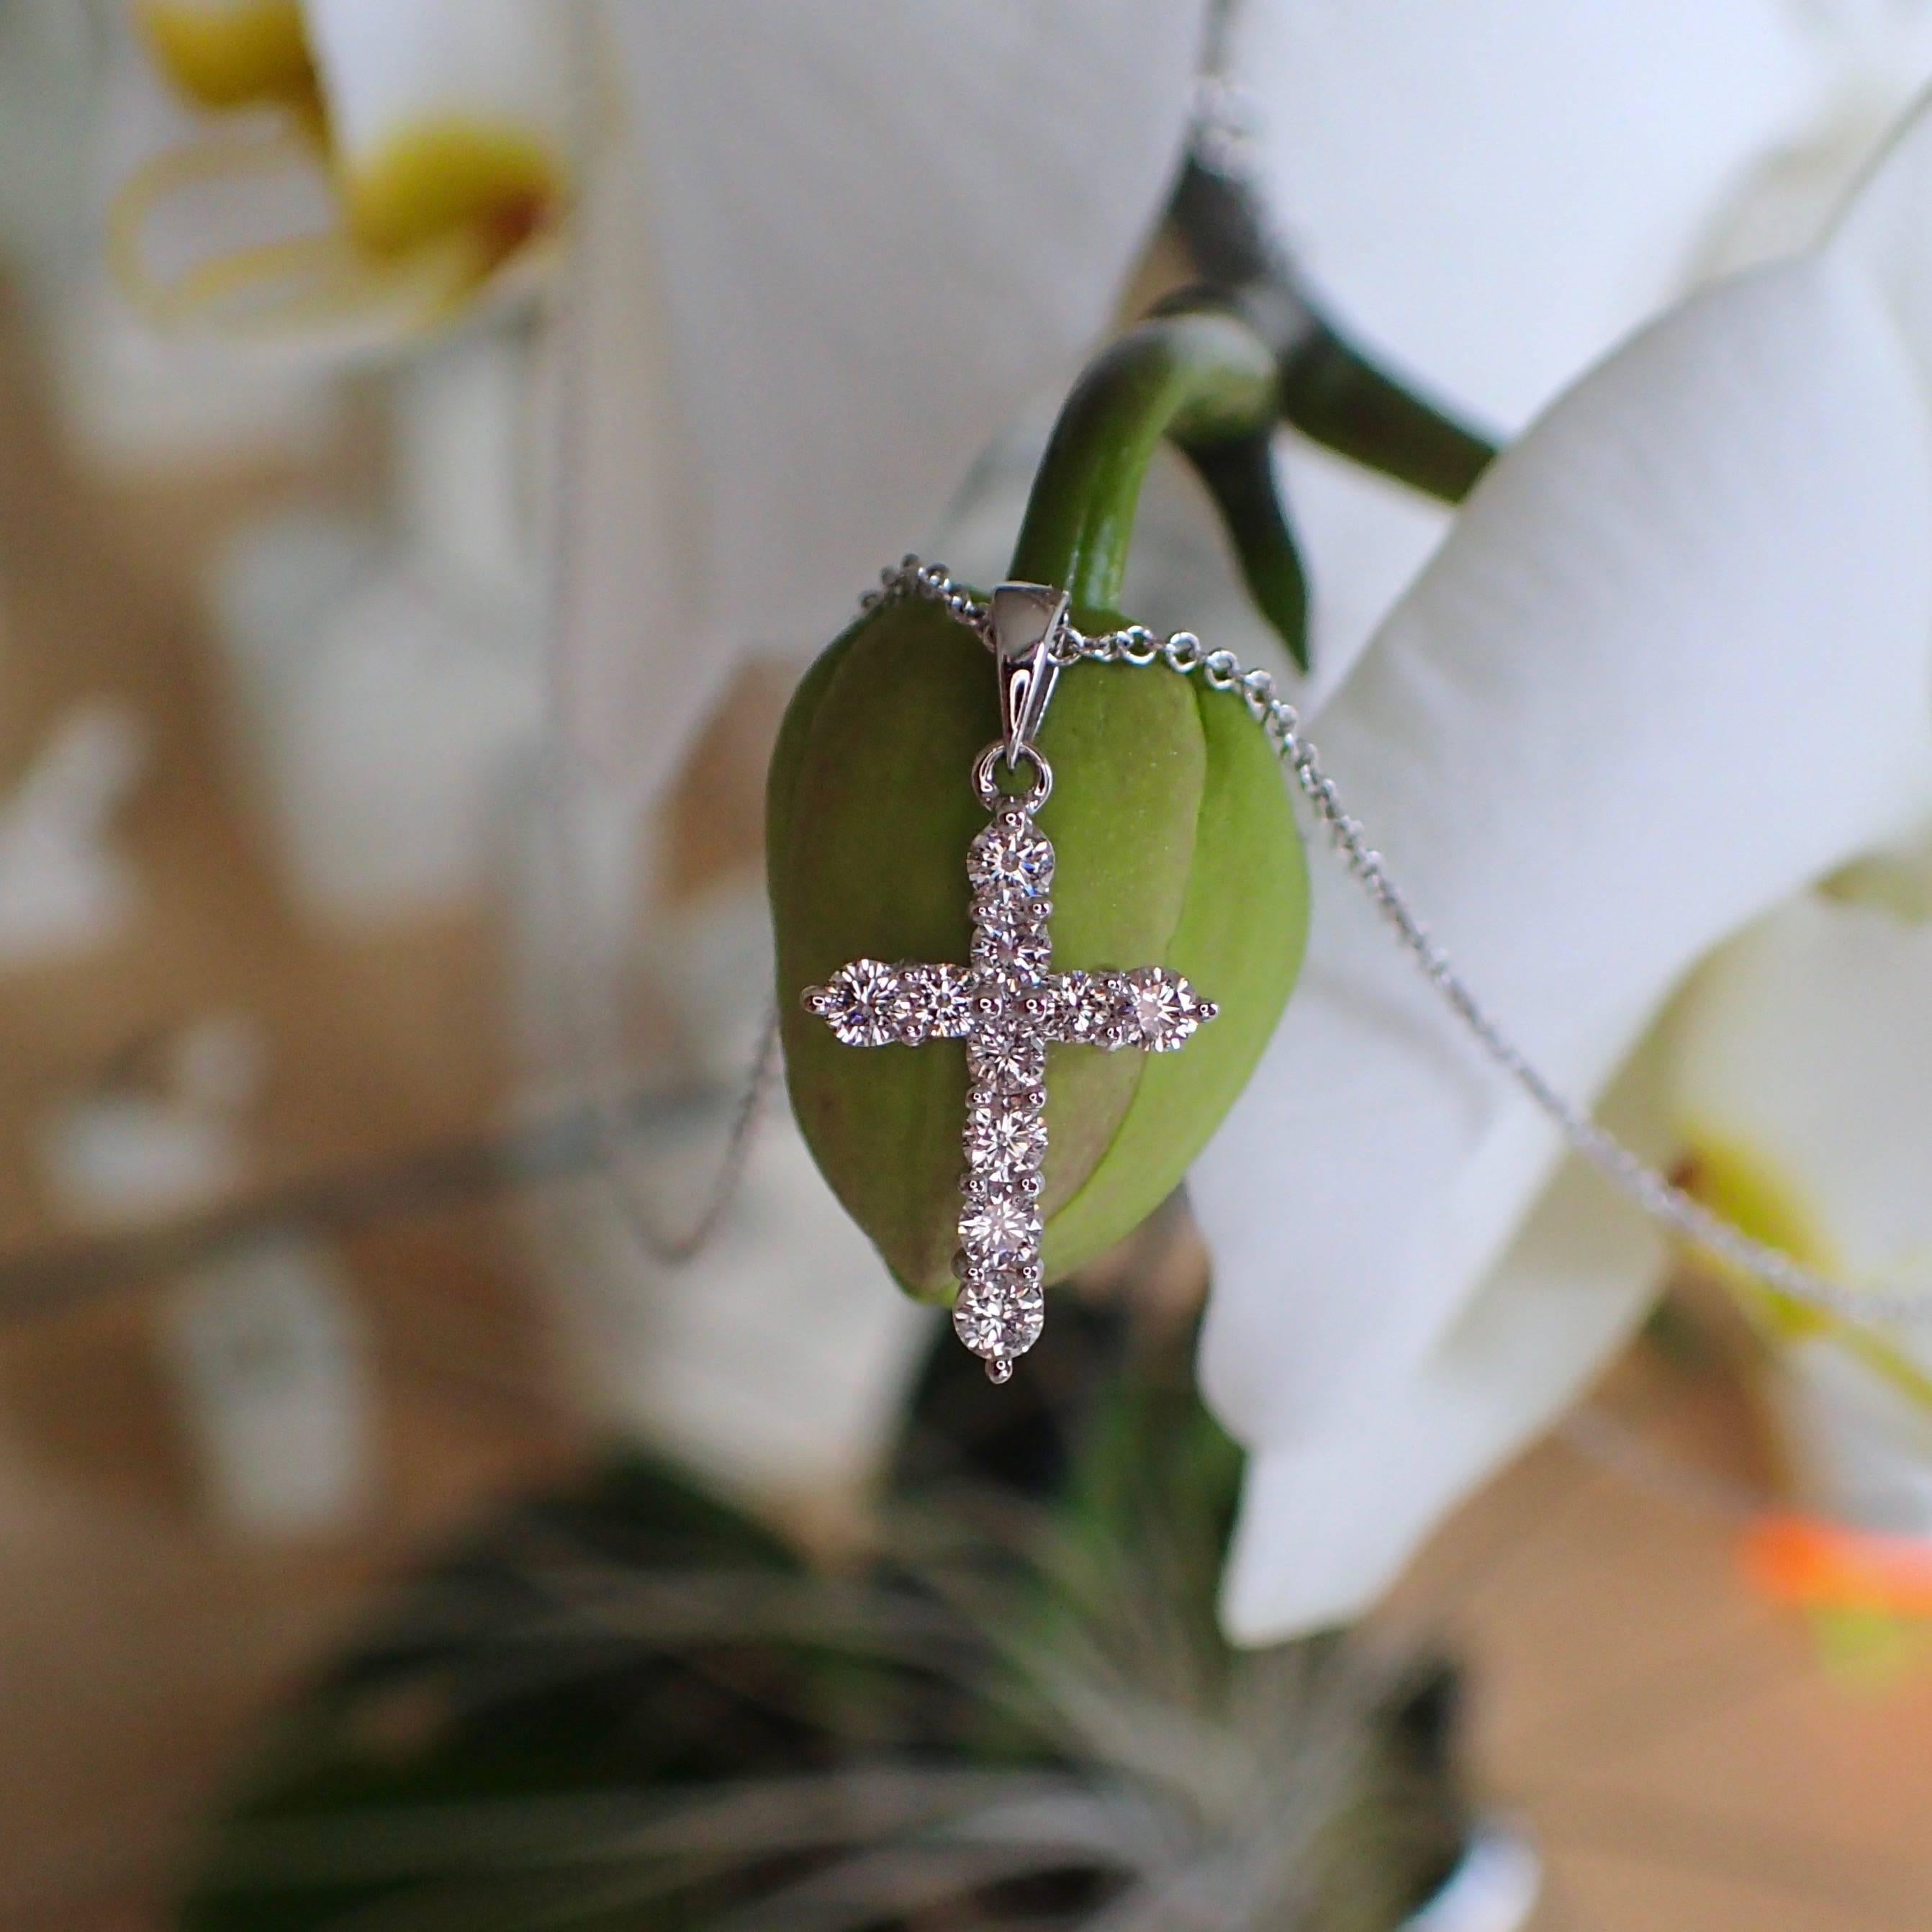 18k white gold thin cross with ten (10) Round Brilliant Cut diamonds weighing a total of 0.37 carats with Color Grade G and Clarity Grade VS. The cross weighs 0.70 grams. The cross measures 19.95mm in length, including the bail and 10.65mm in width.